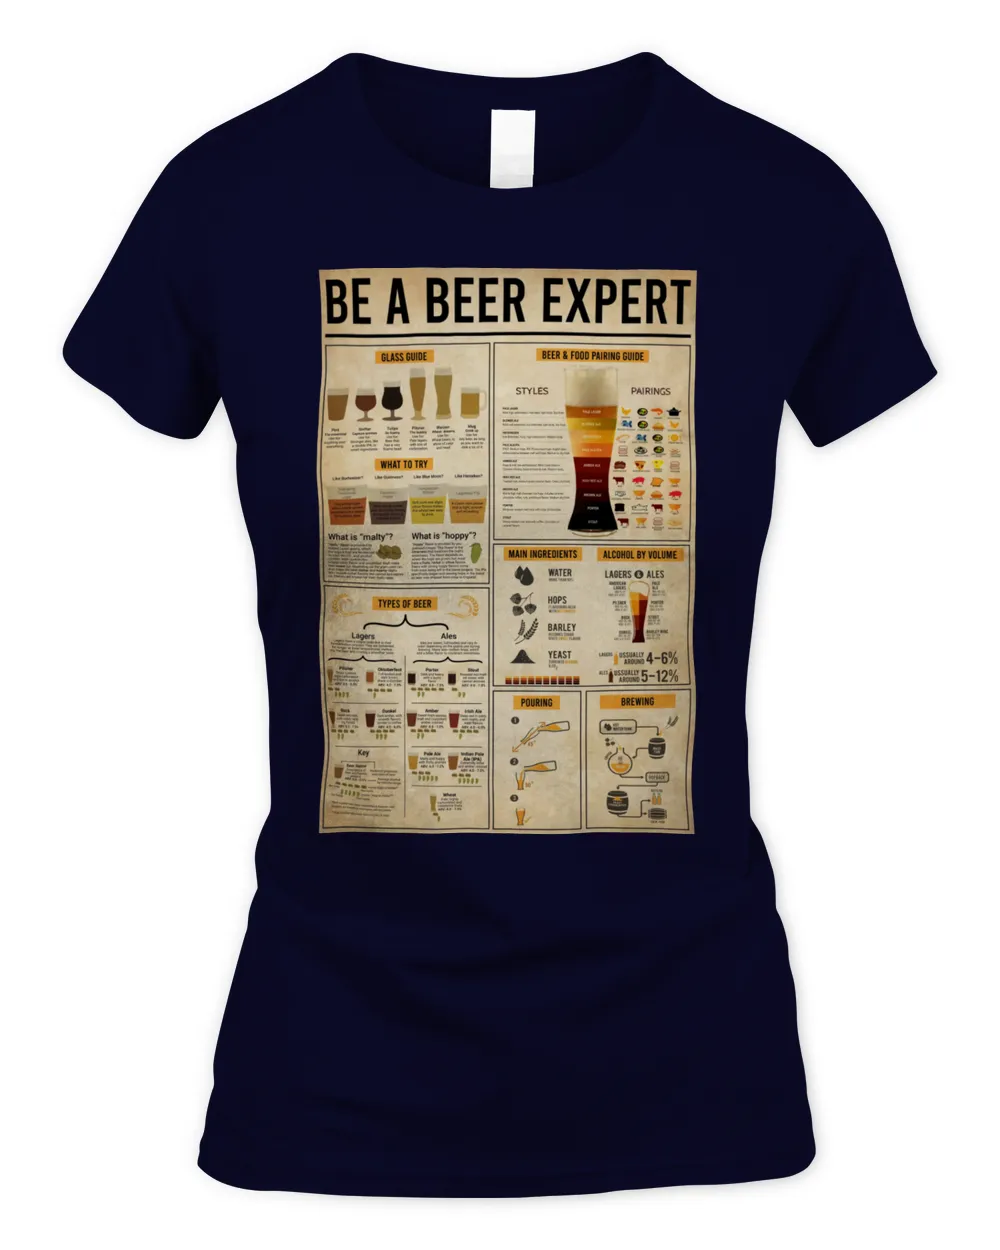 home decor poster beer knowledge poster ideal gift